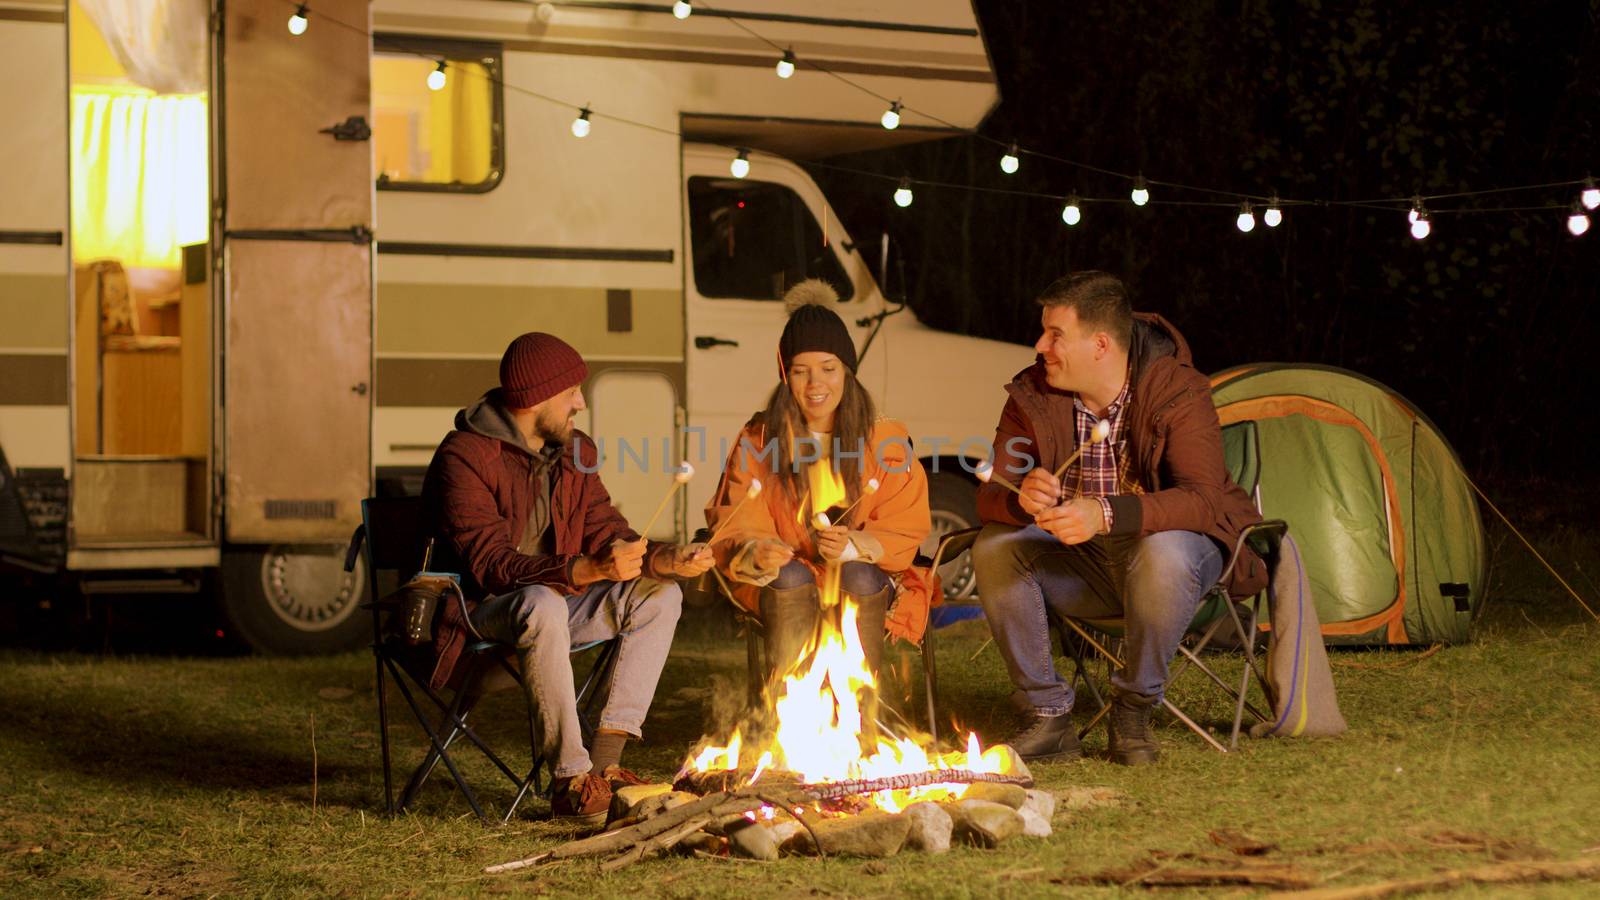 Group of happy friends around burning camping fire in the woods roasting marshmallows. Retro camper van.